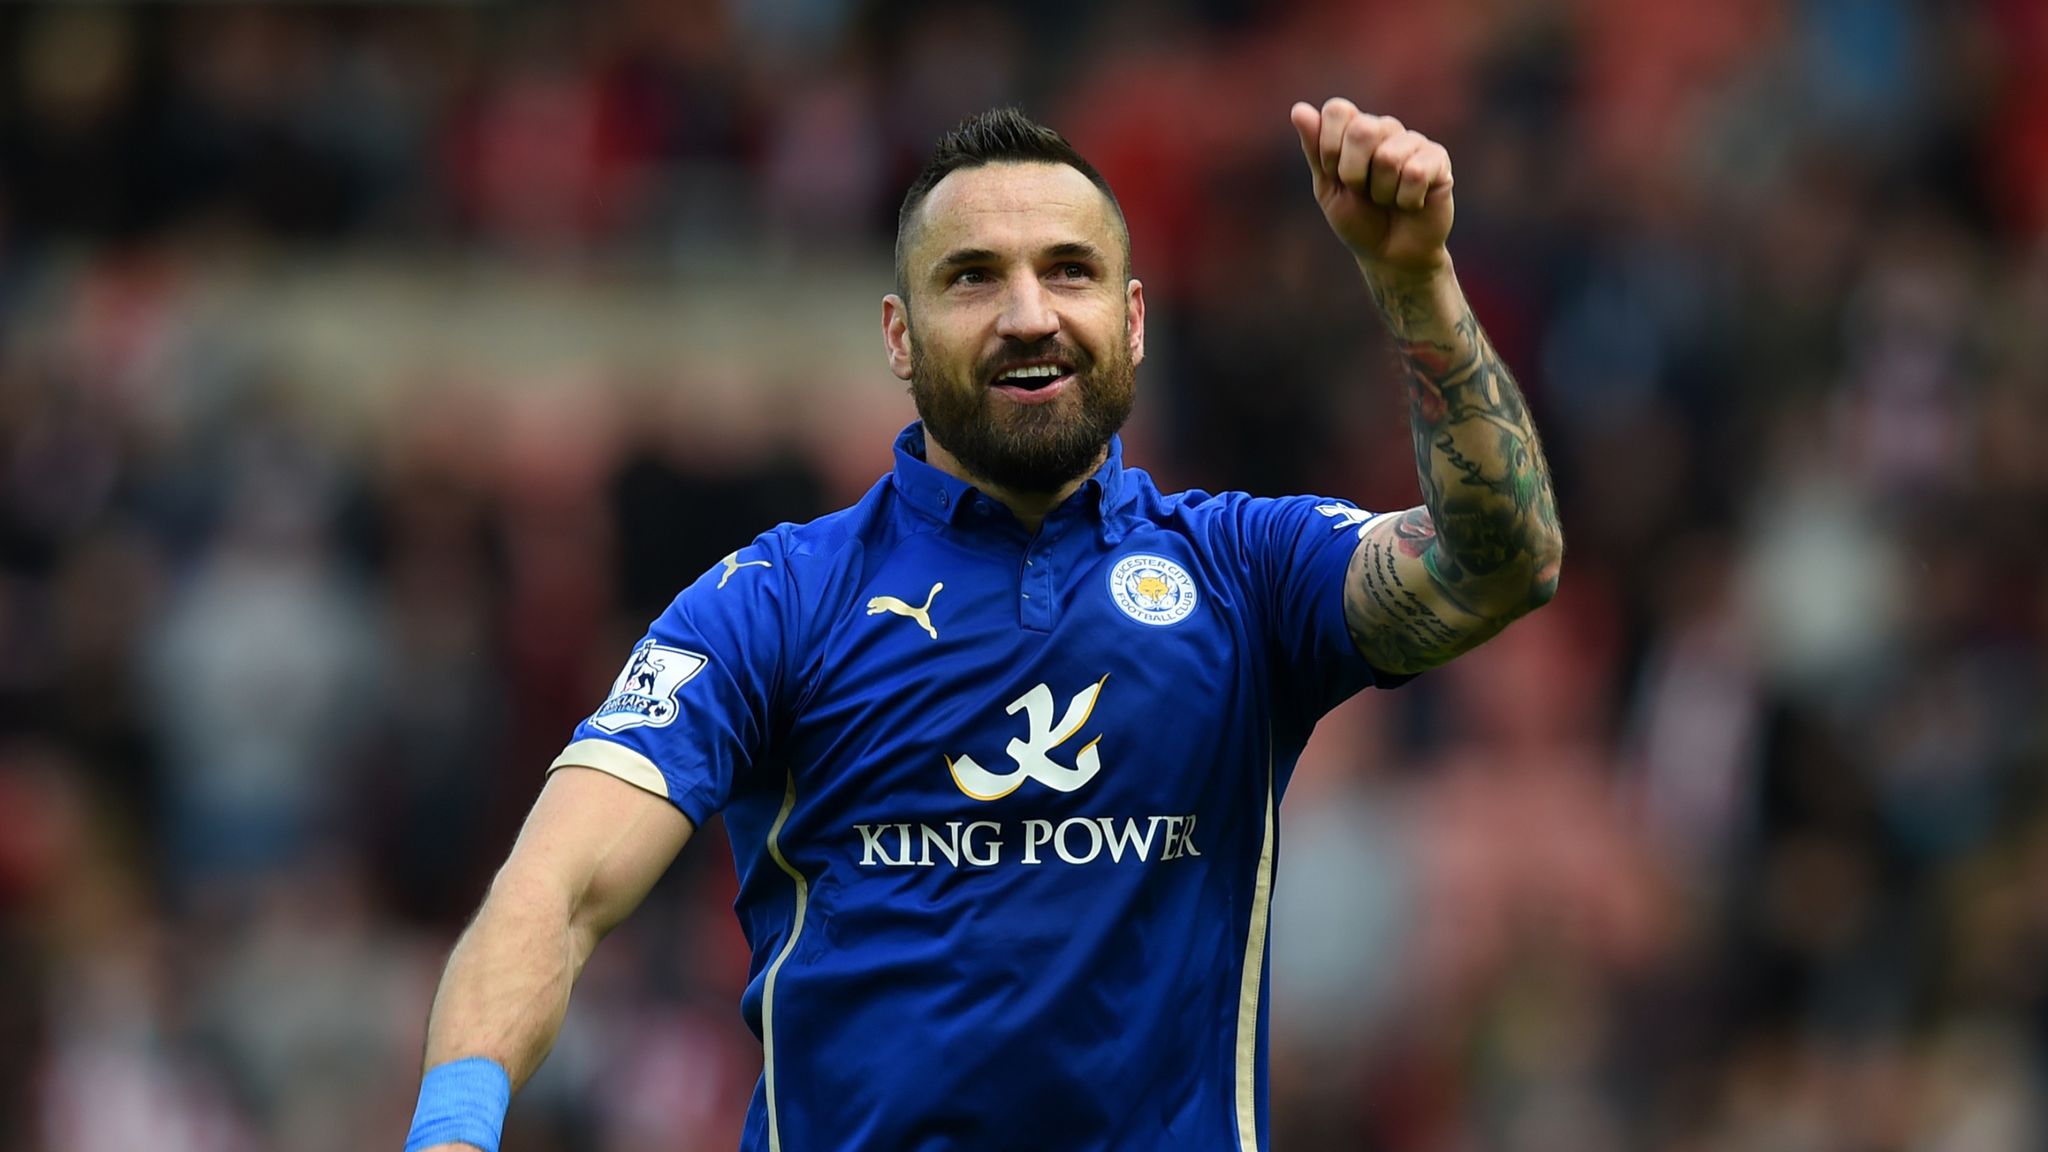 Marcin Wasilewski to leave Leicester City at end of season | Football News | Sky Sports